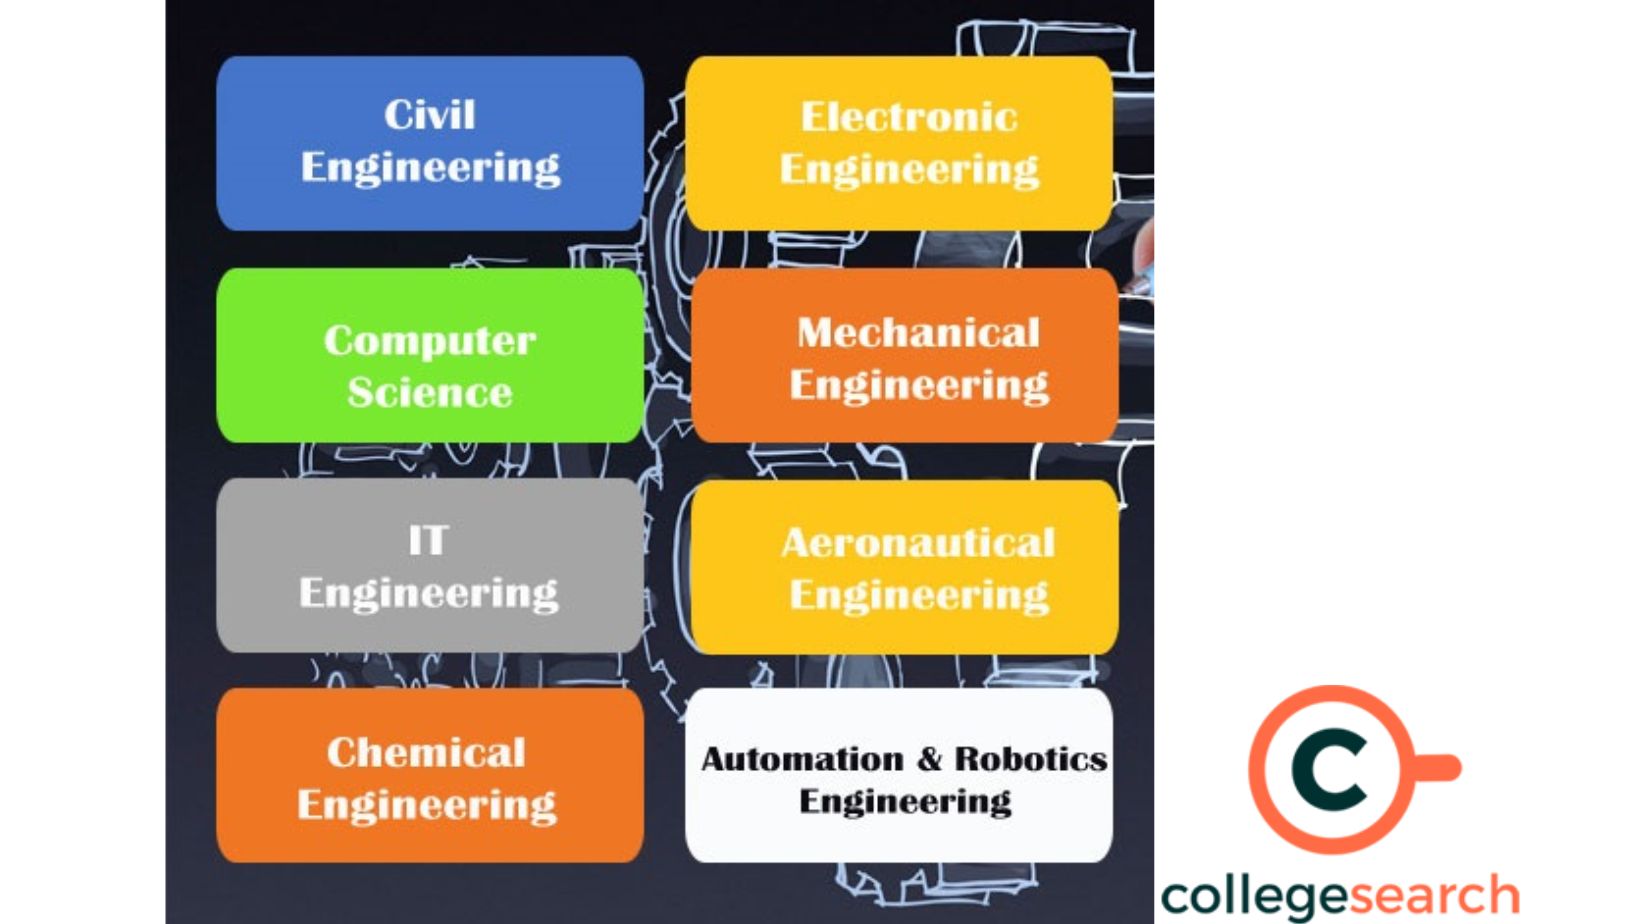 What are the top 3 branch of engineering?